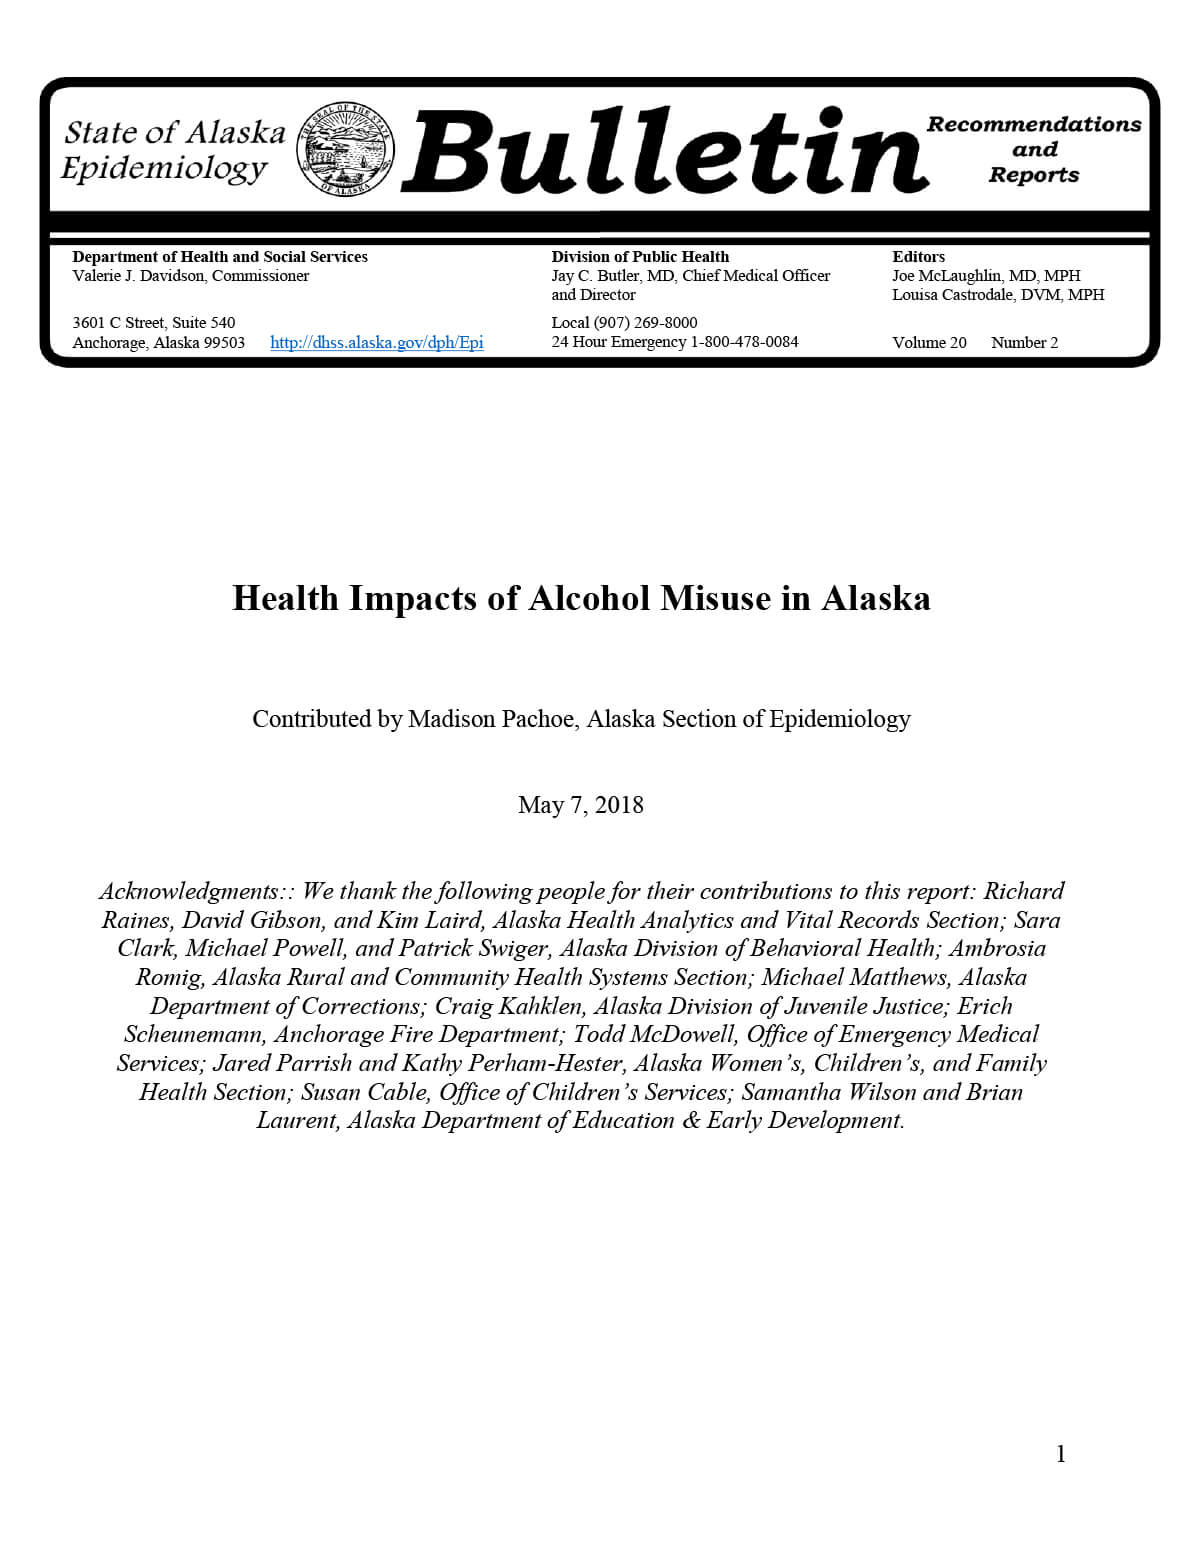 Health Impacts of Alcohol Misuse in Alaska - Alaska Section of Epidemiology